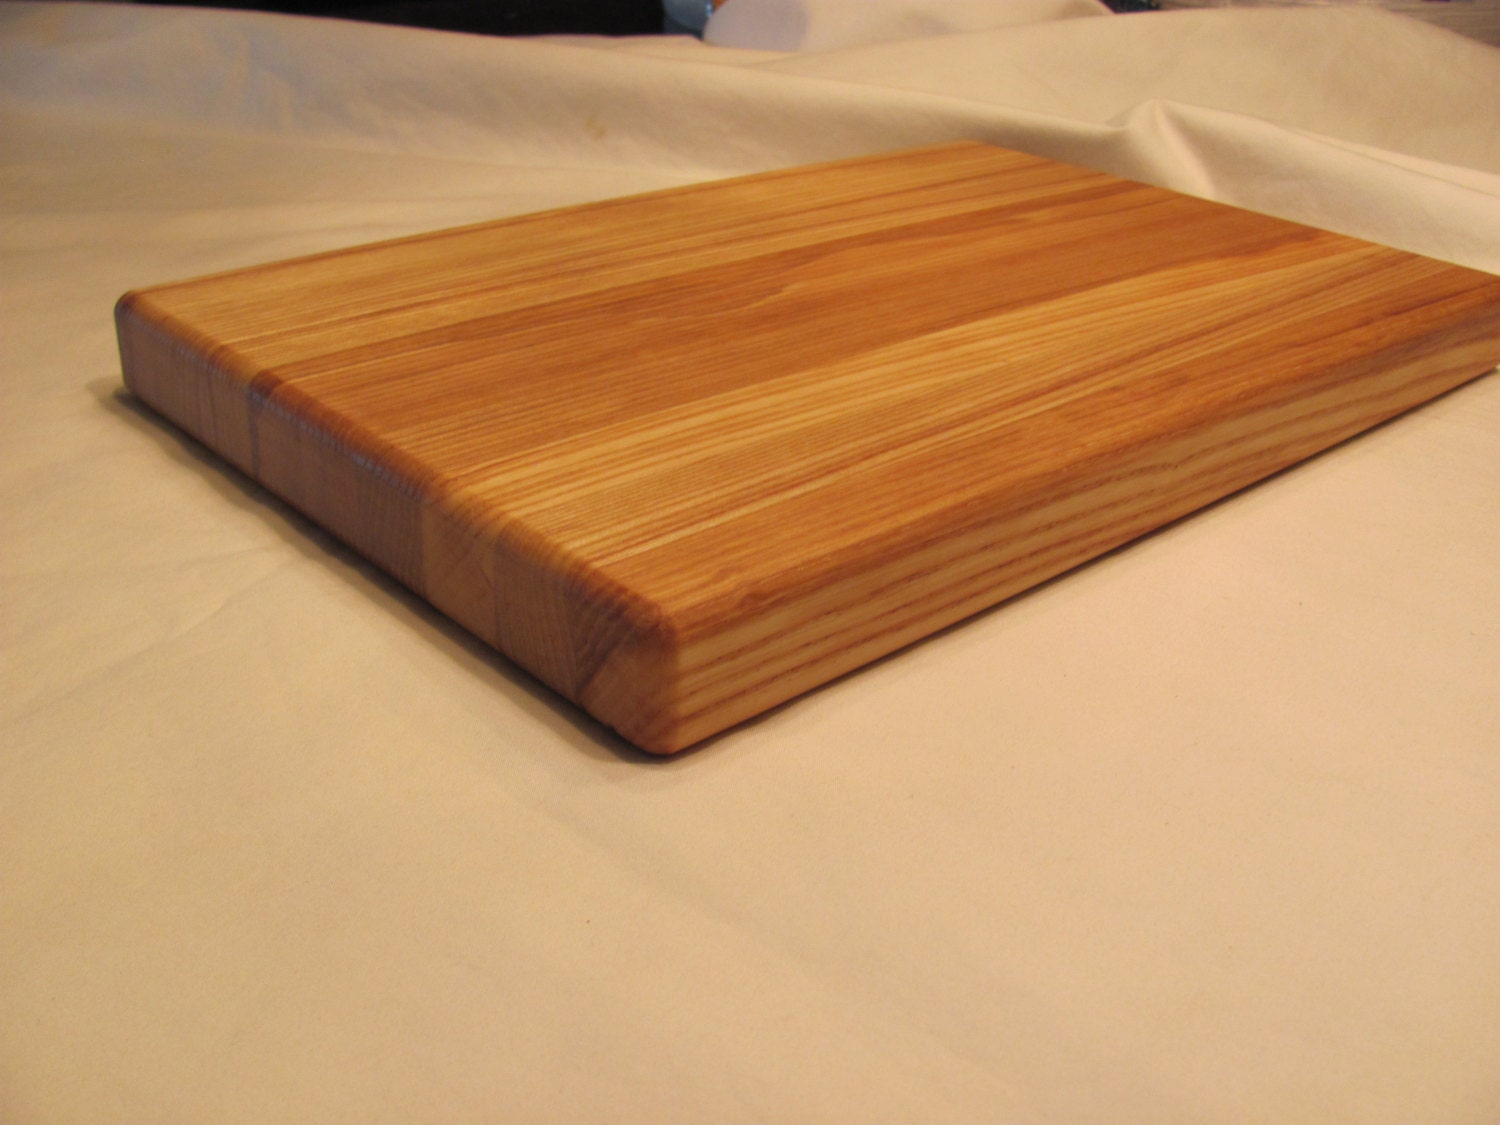 Ash Cutting Board Wood Cutting Board Carving By Zimwoodworking 